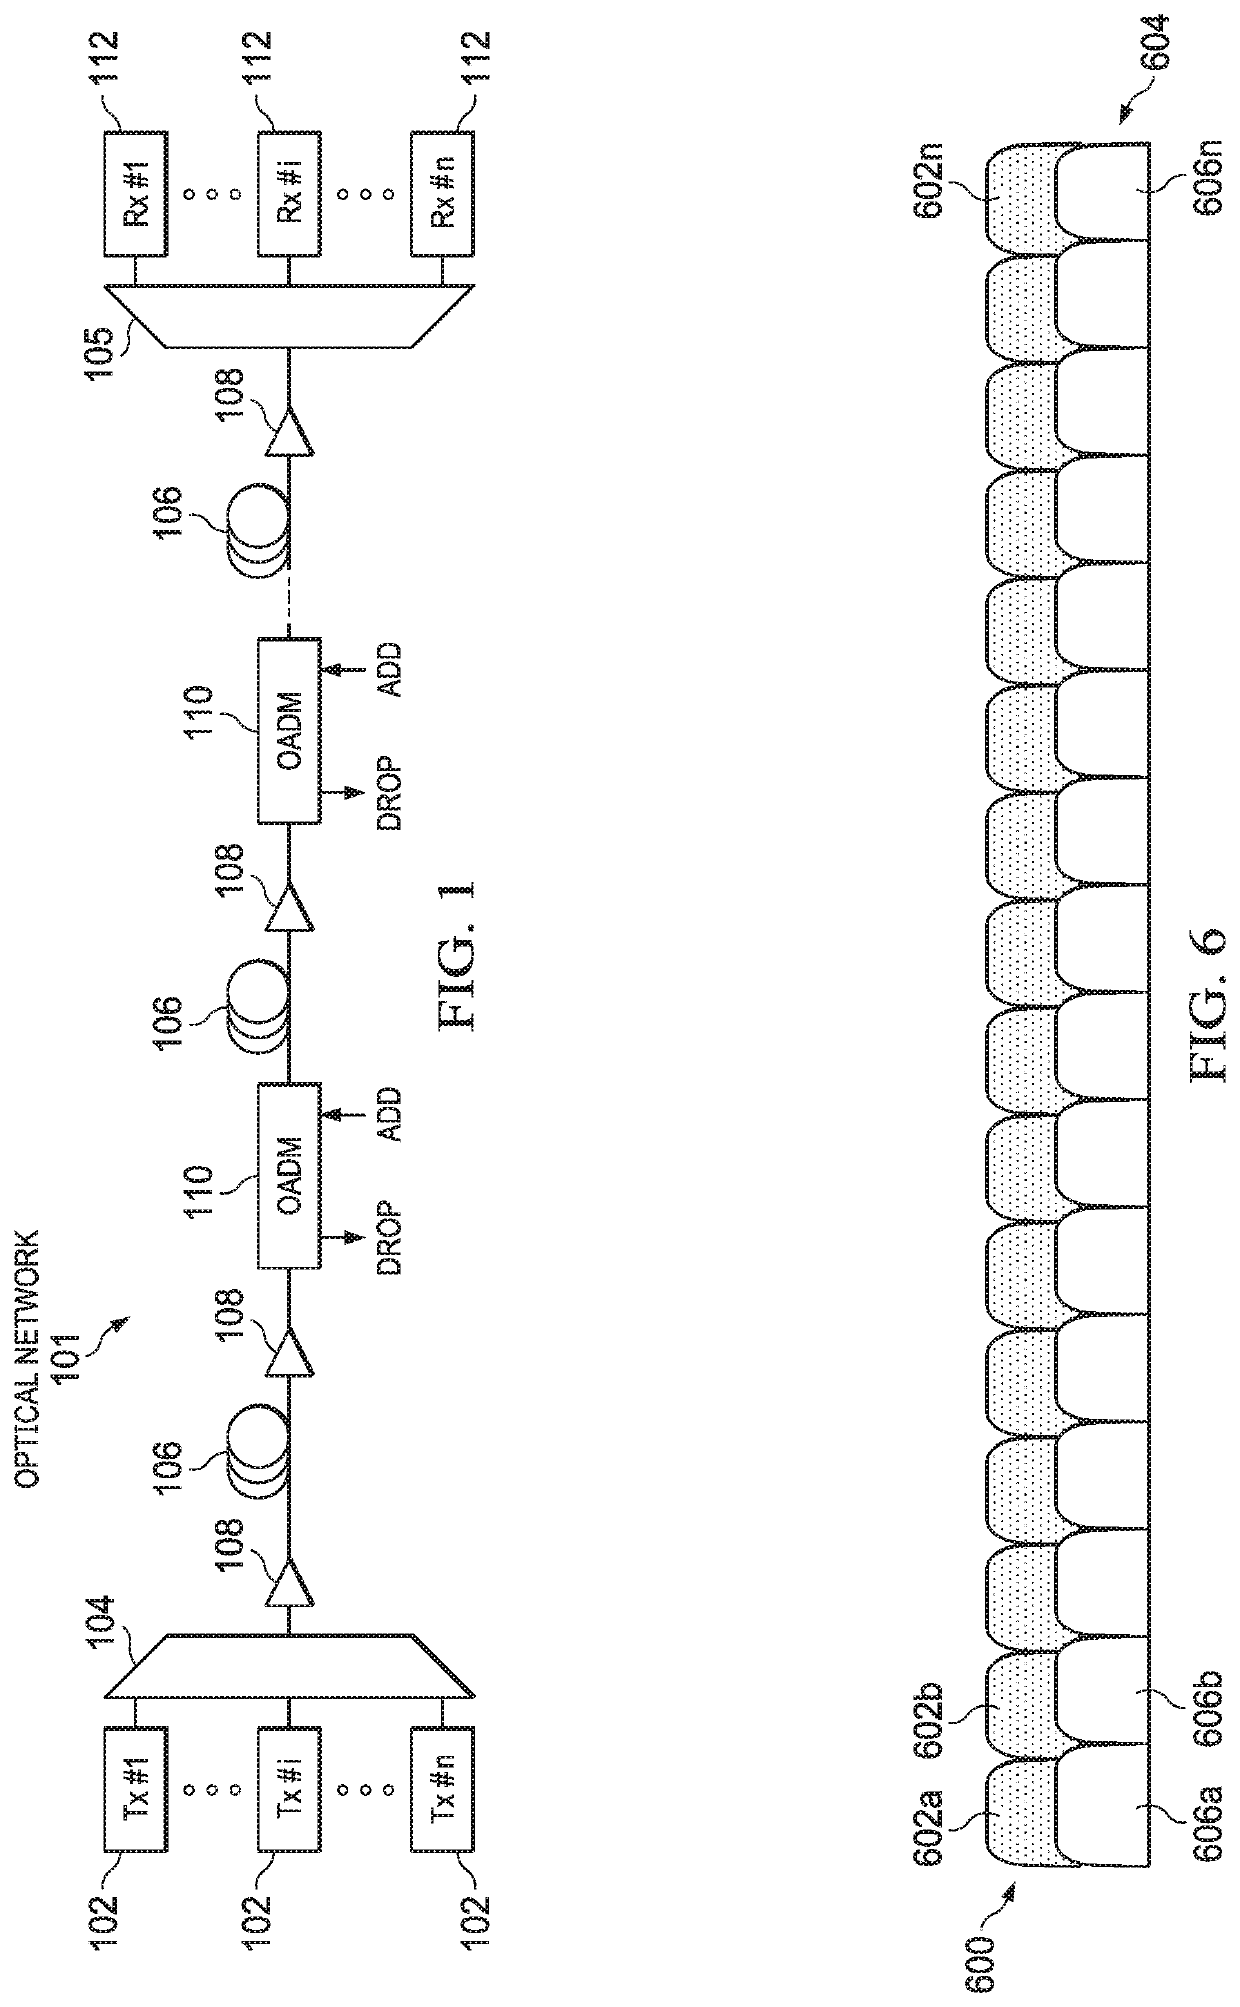 Optical system including a reconfigurable optical add/drop multiplexer and filters